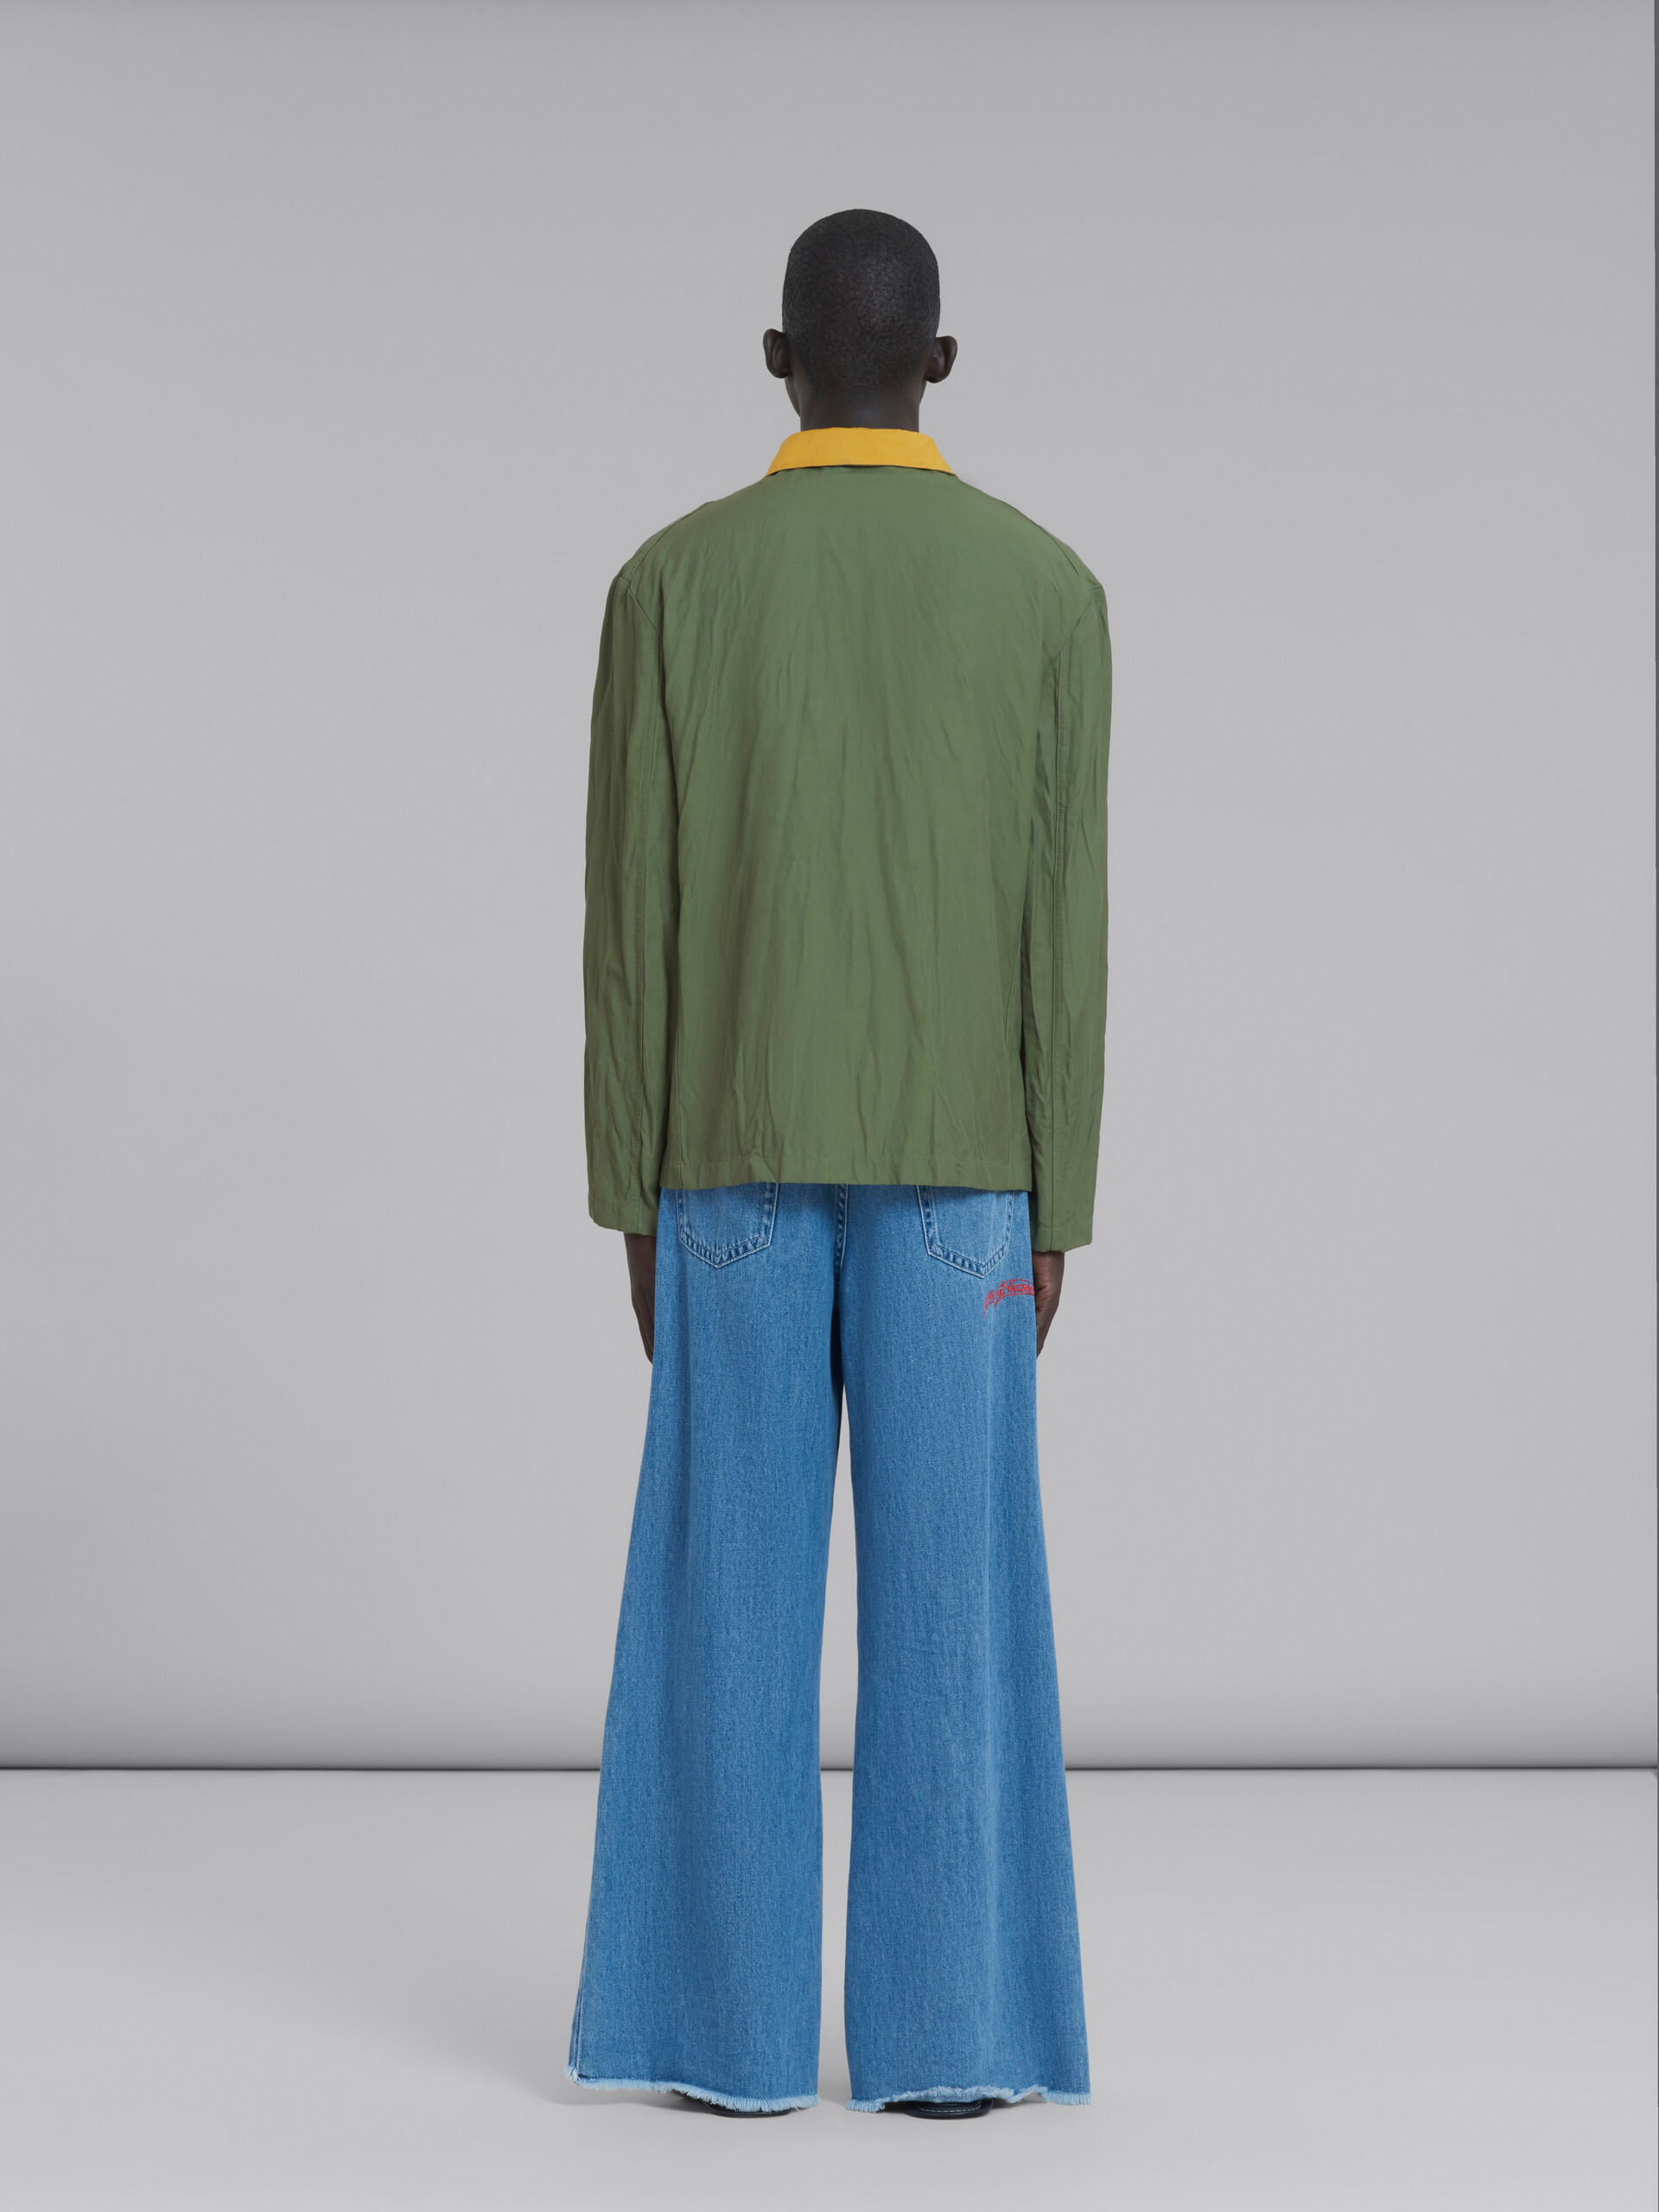 Marni x No Vacancy Inn - Green gabardine jacket with embroidered patches - Jackets - Image 3